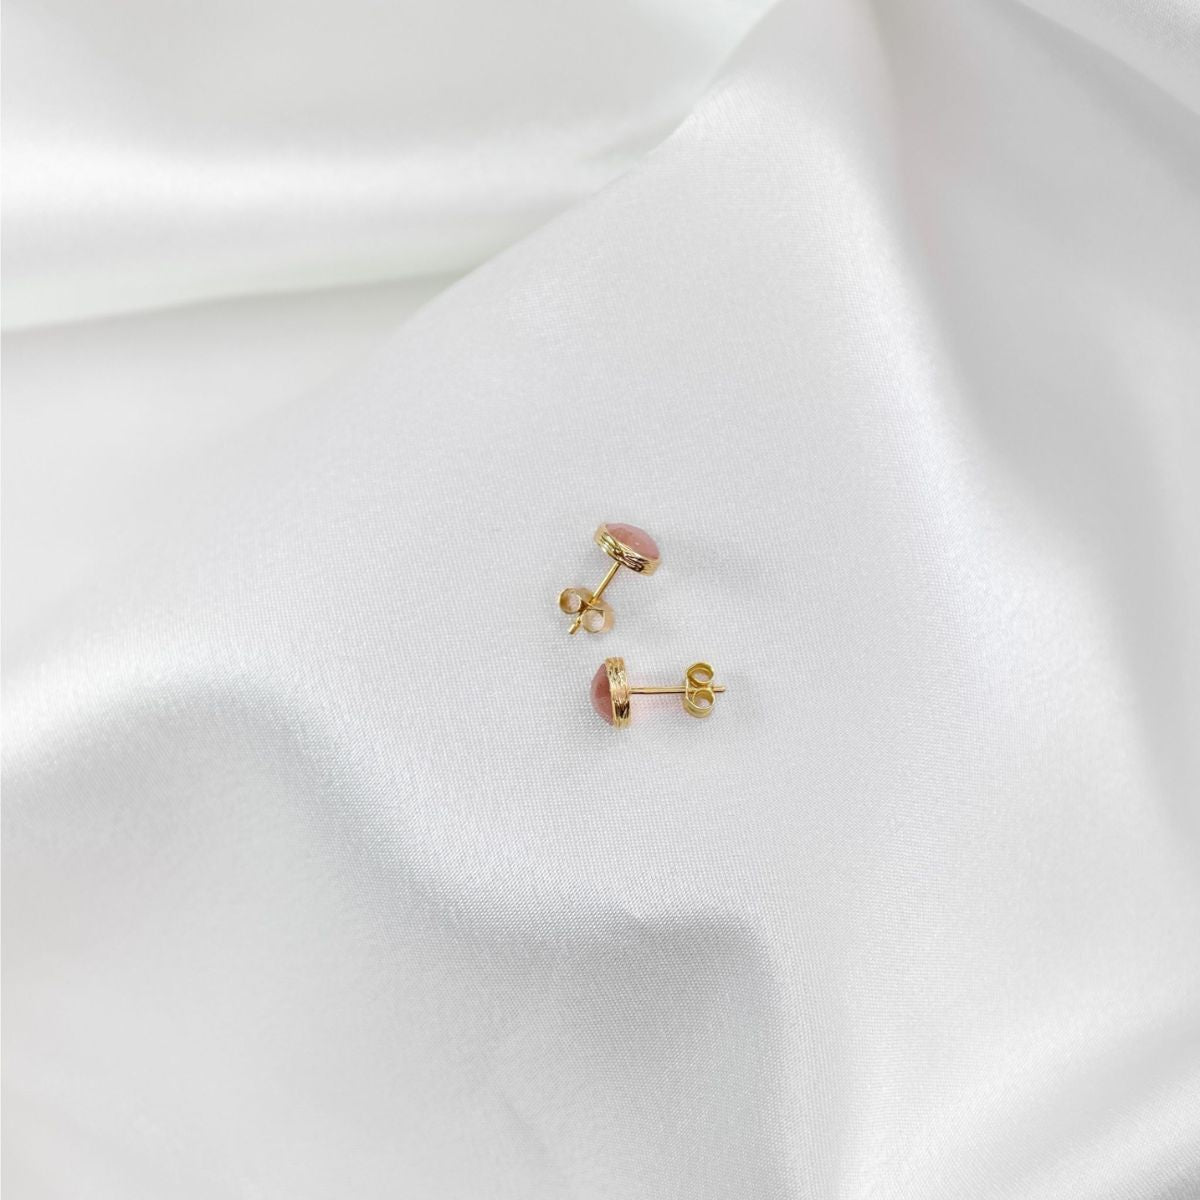 a pair of peach moonstone studs on a white cloth